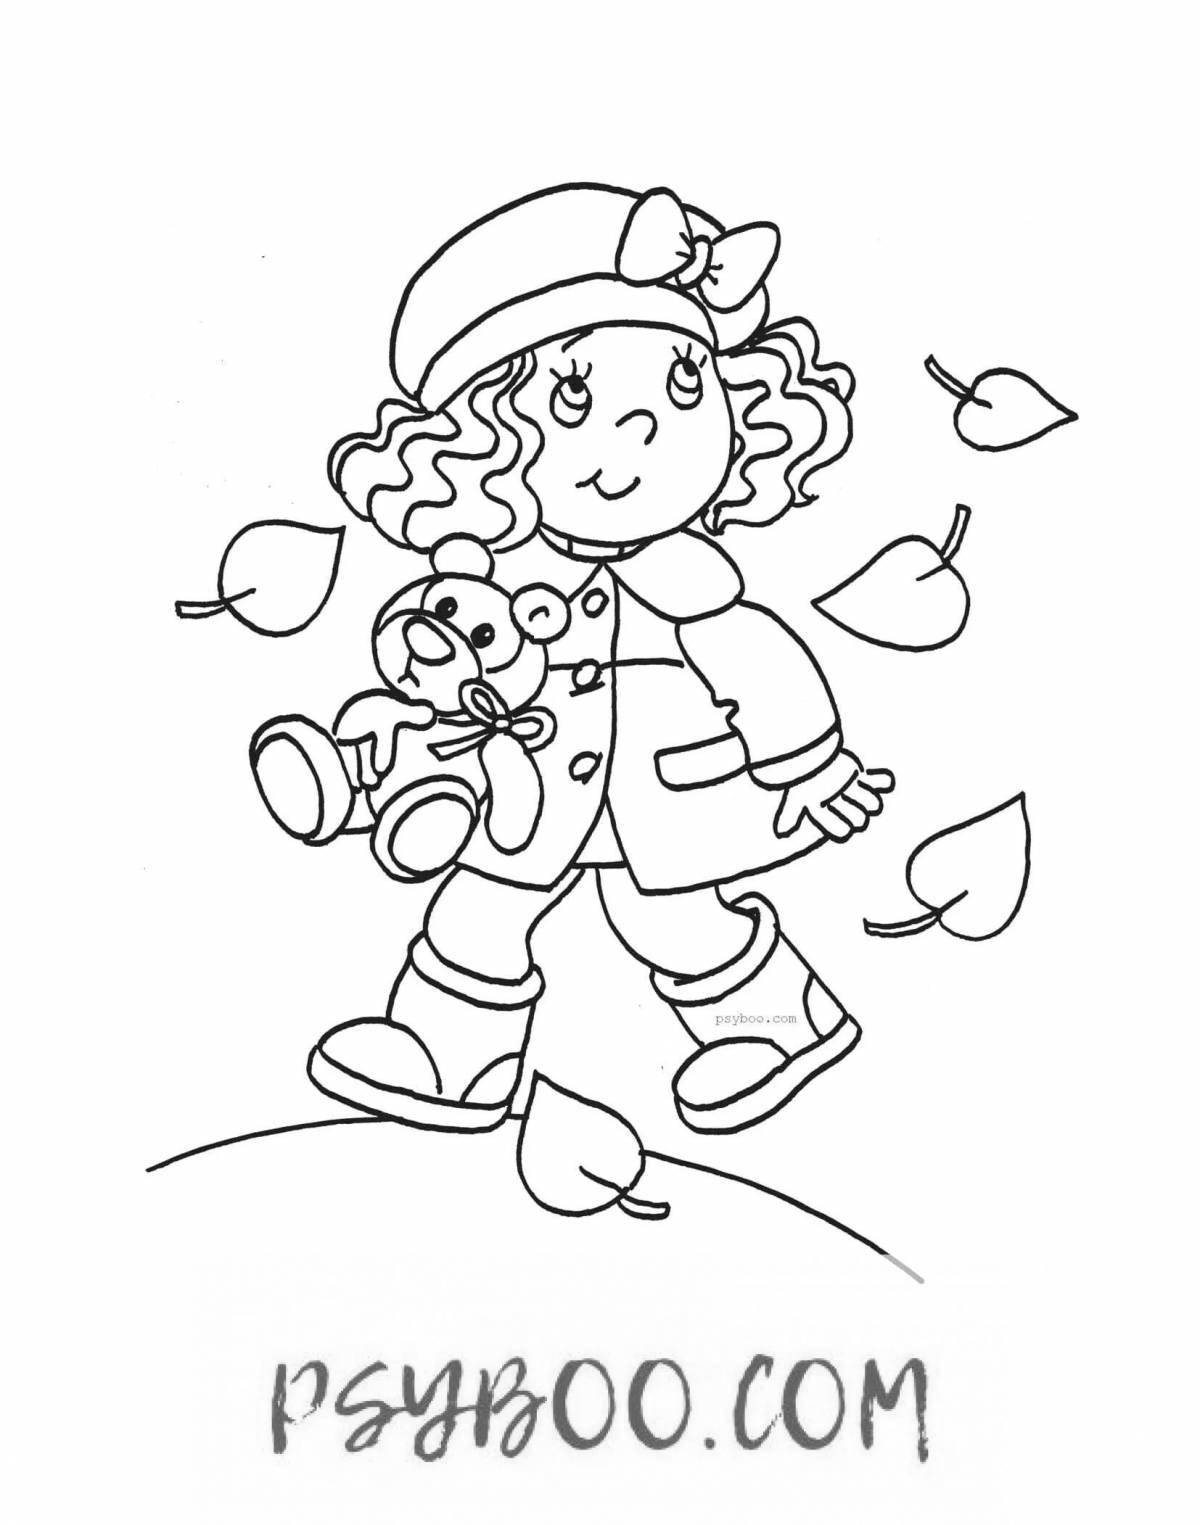 Animated autumn girl coloring page